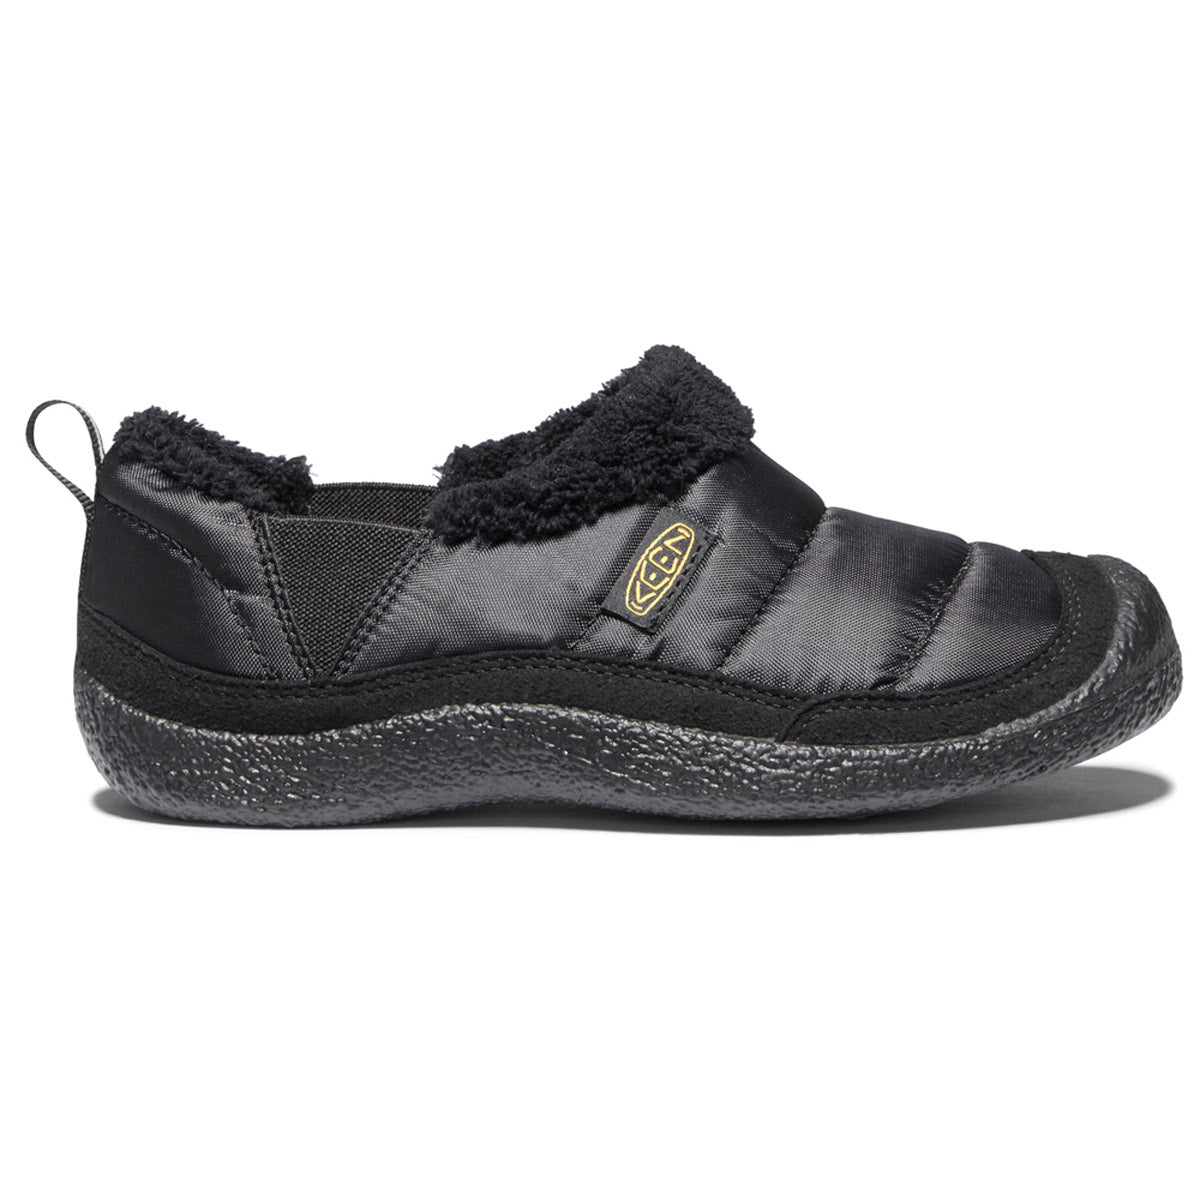 Keen Howser II Child Black - Kids step-in comfort slip-on shoe with a plush lining and a loop pull on the heel.